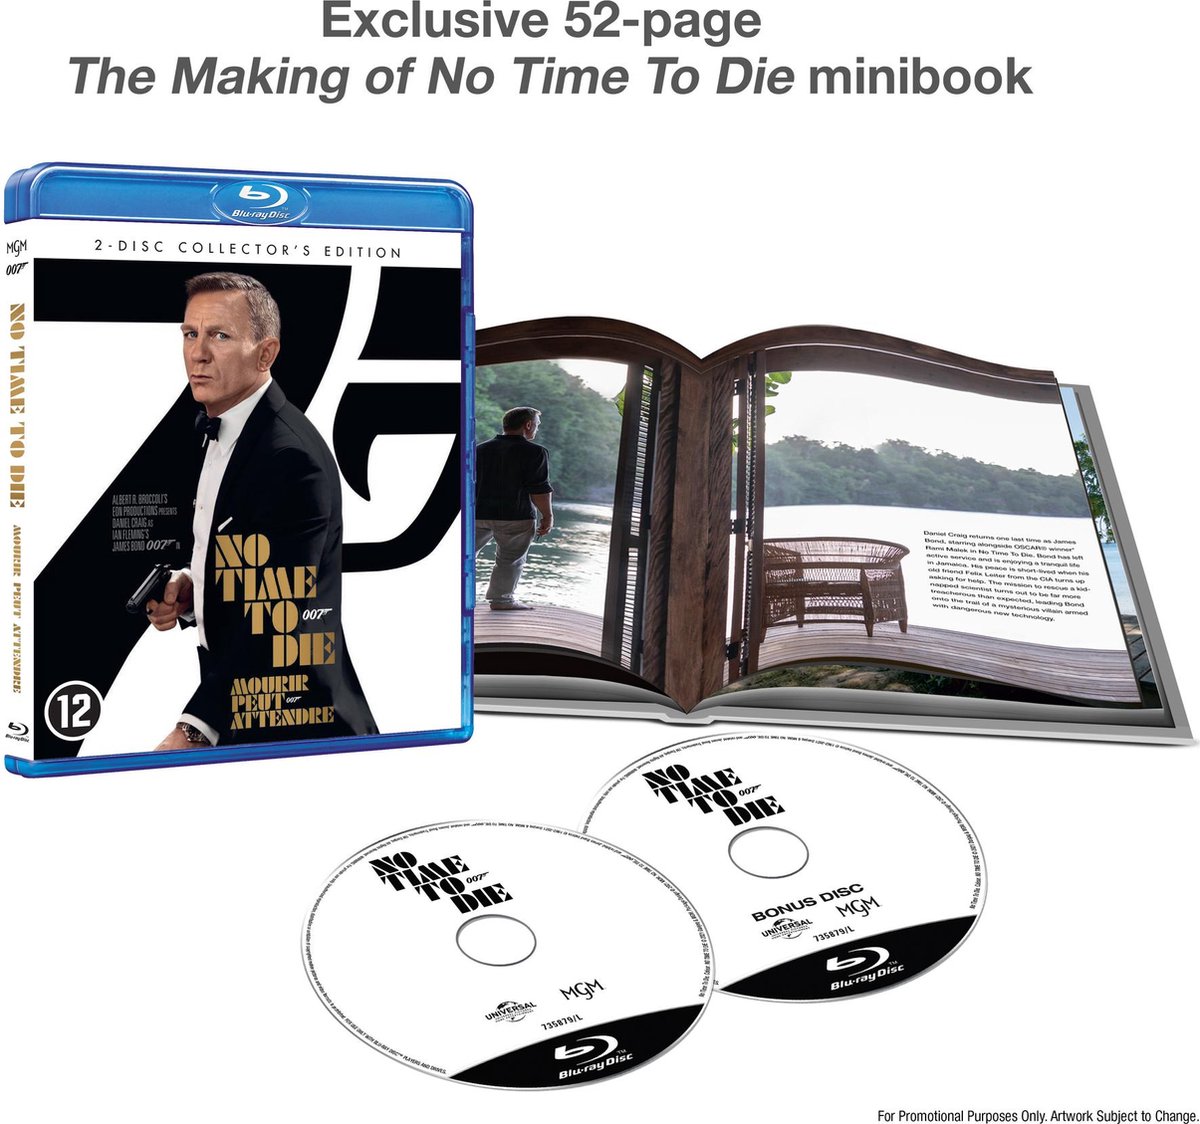 James Bond: No Time To Die (Blu-ray + Booklet) - 